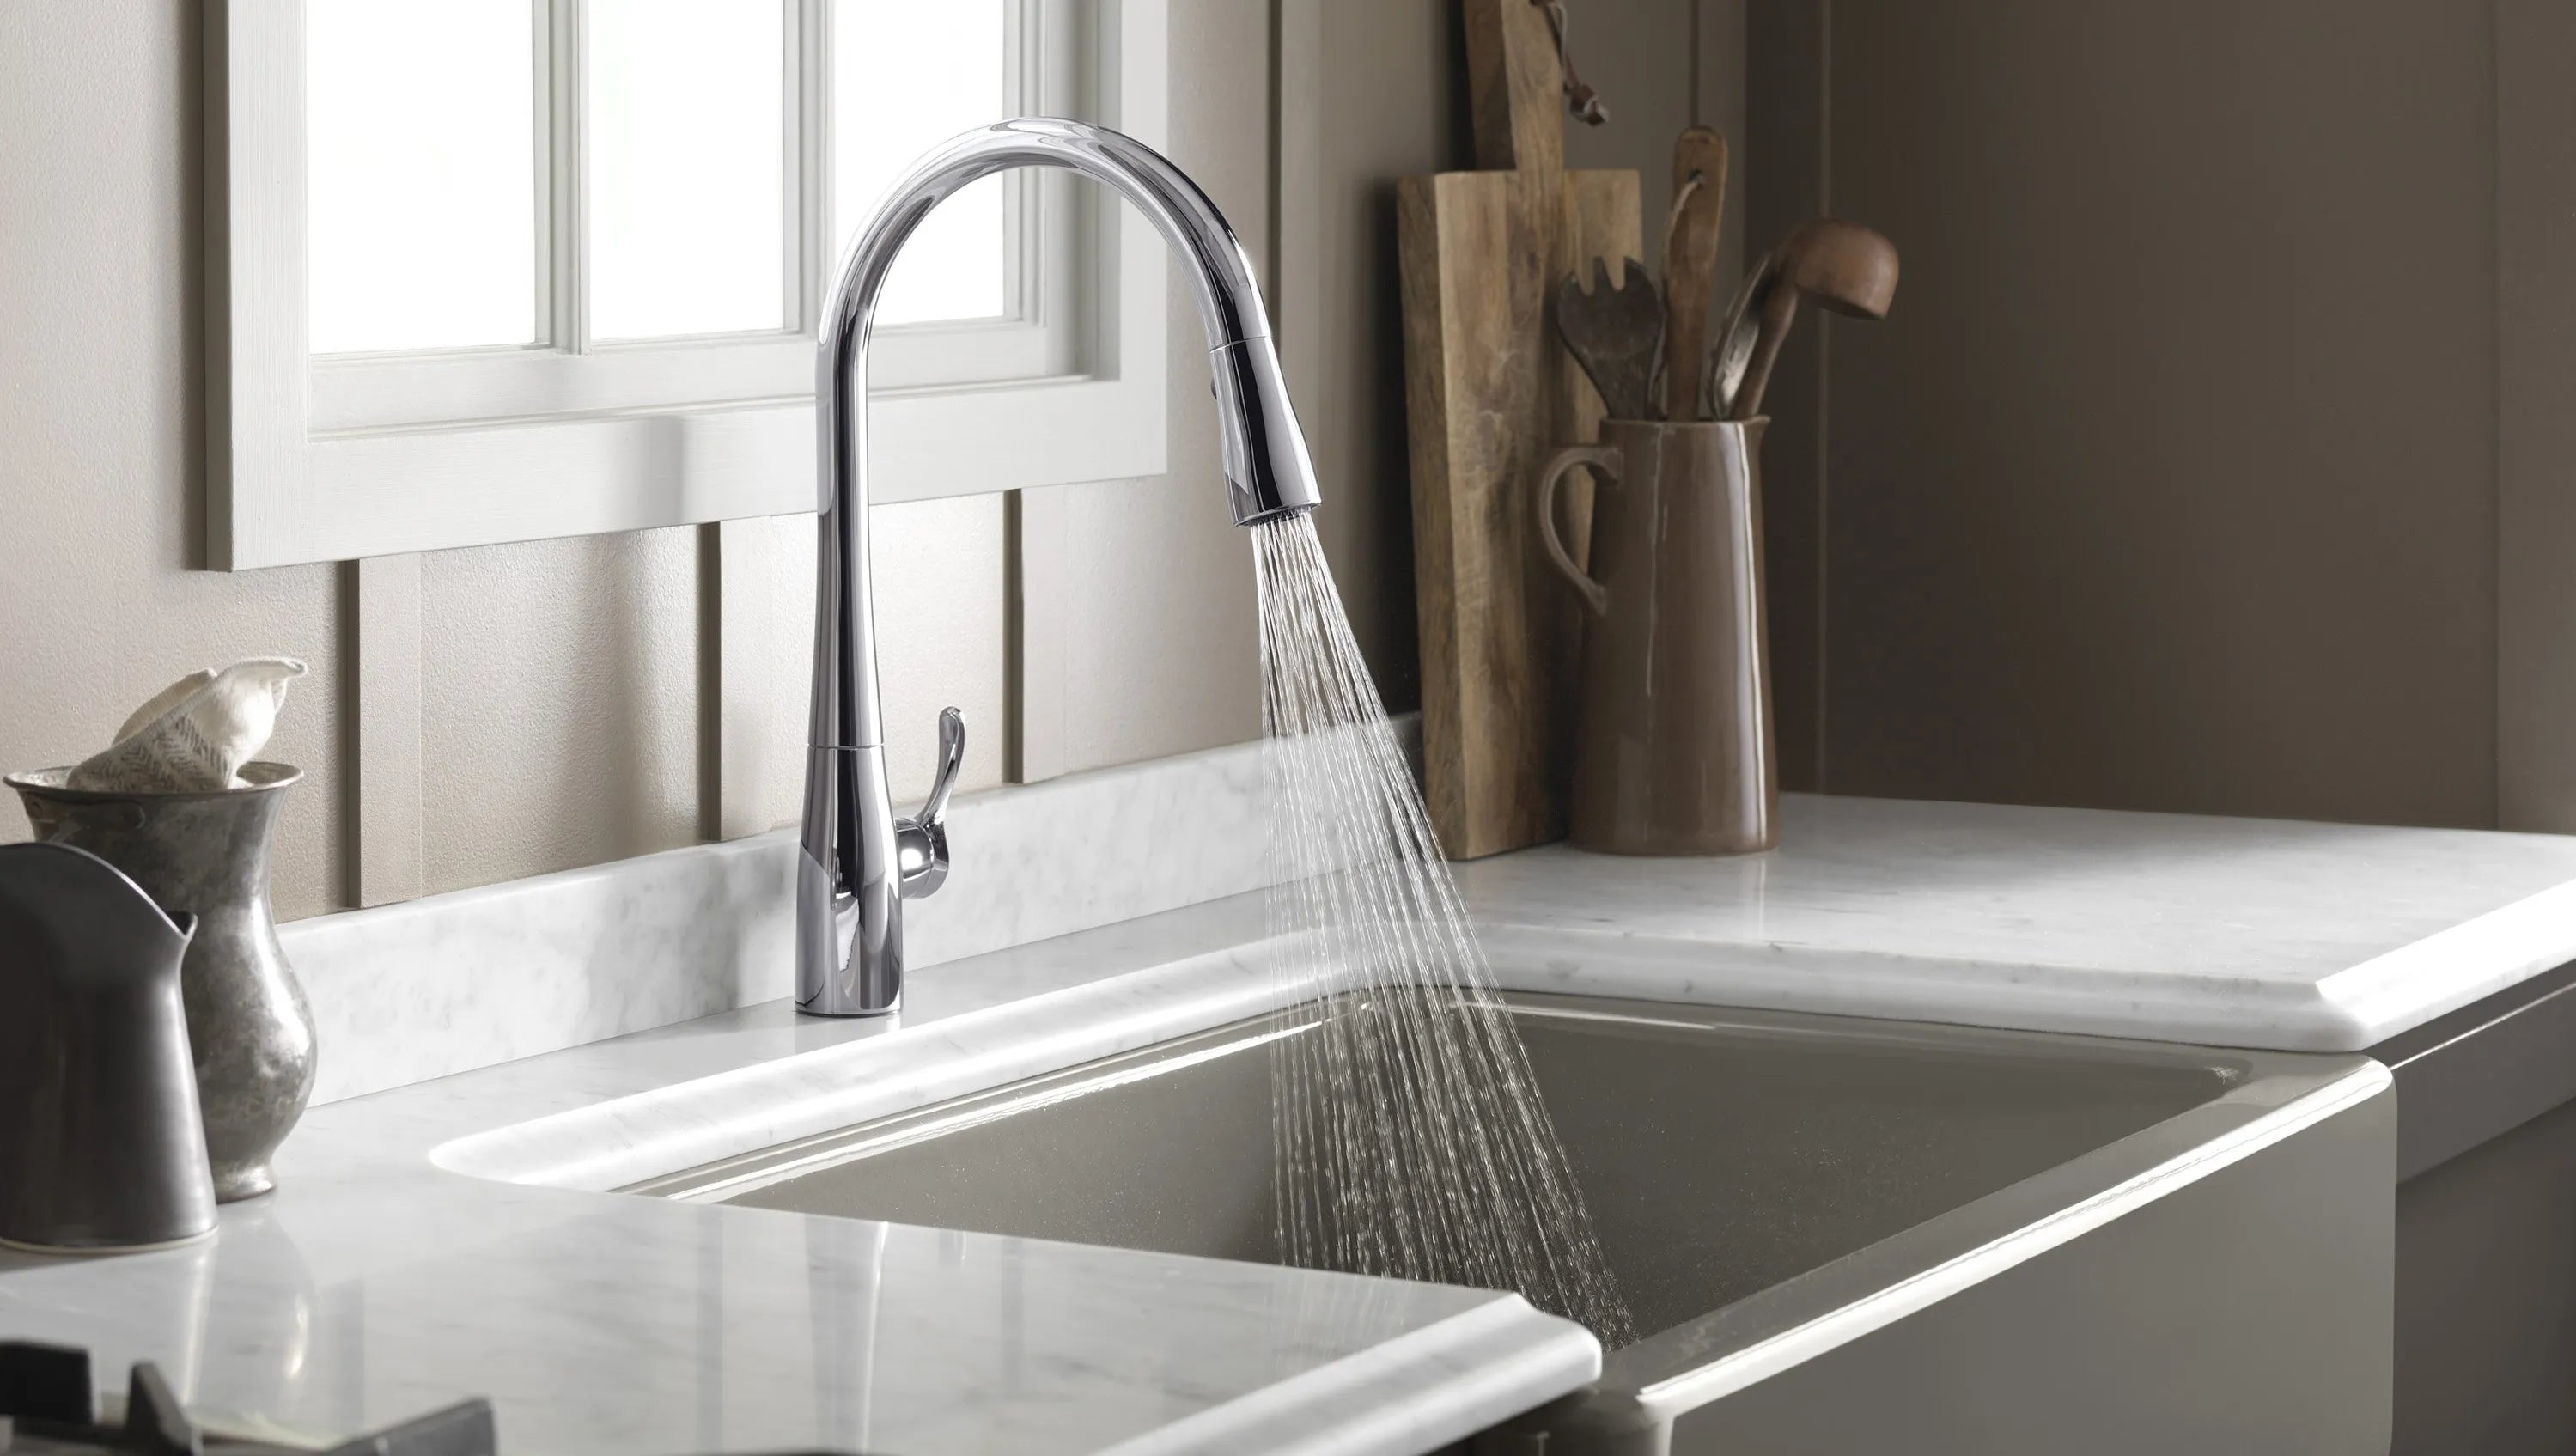 Image of a stylish kitchen faucet - a pull our sprayer design